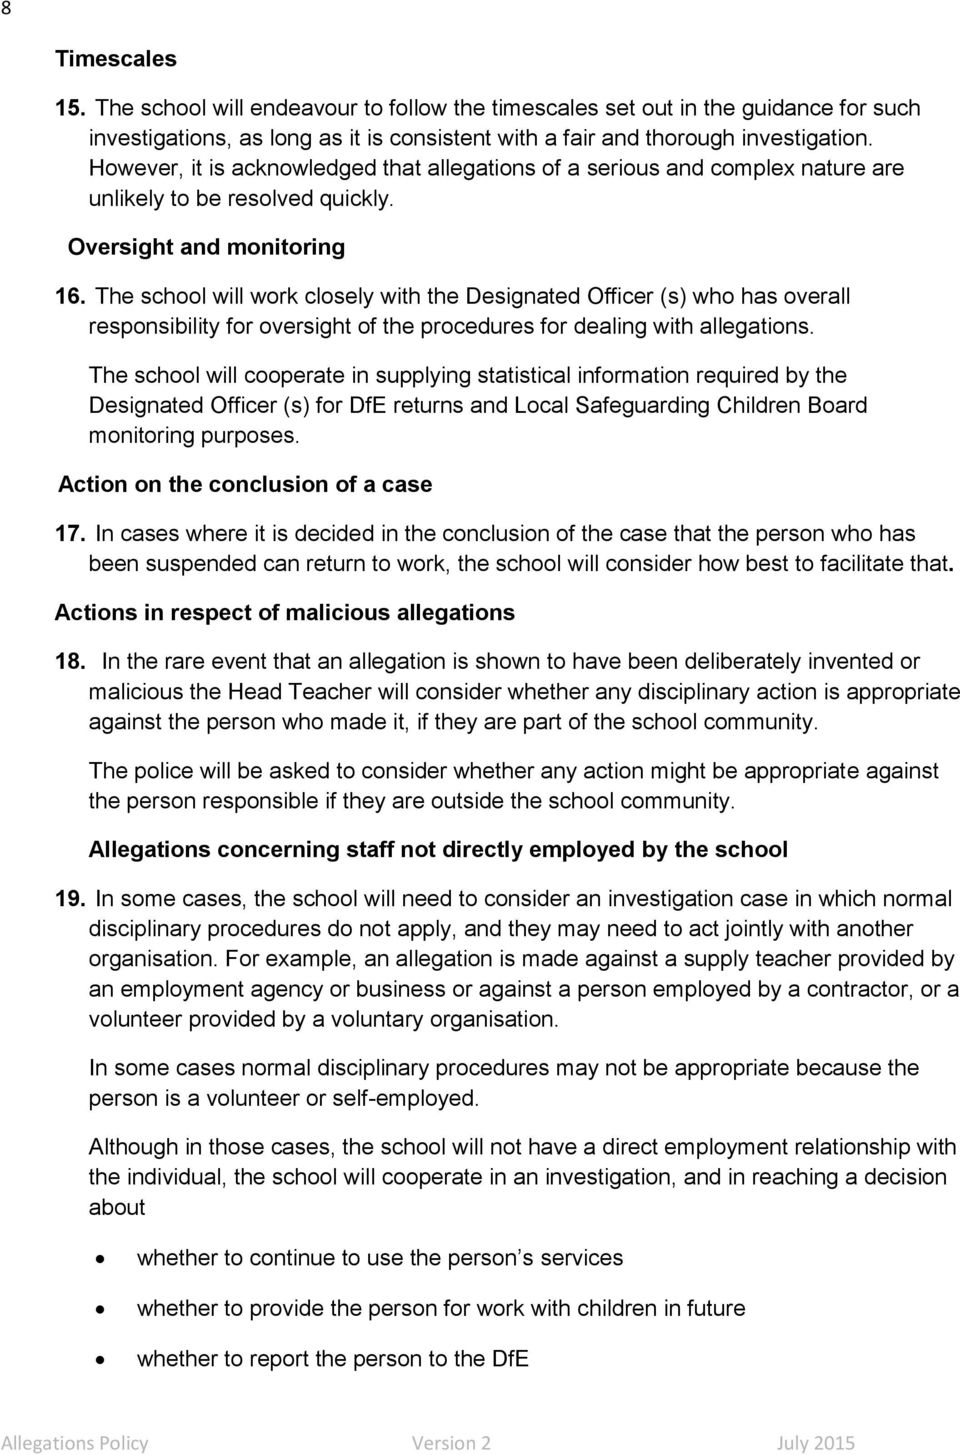 The school will work closely with the Designated Officer (s) who has overall responsibility for oversight of the procedures for dealing with allegations.